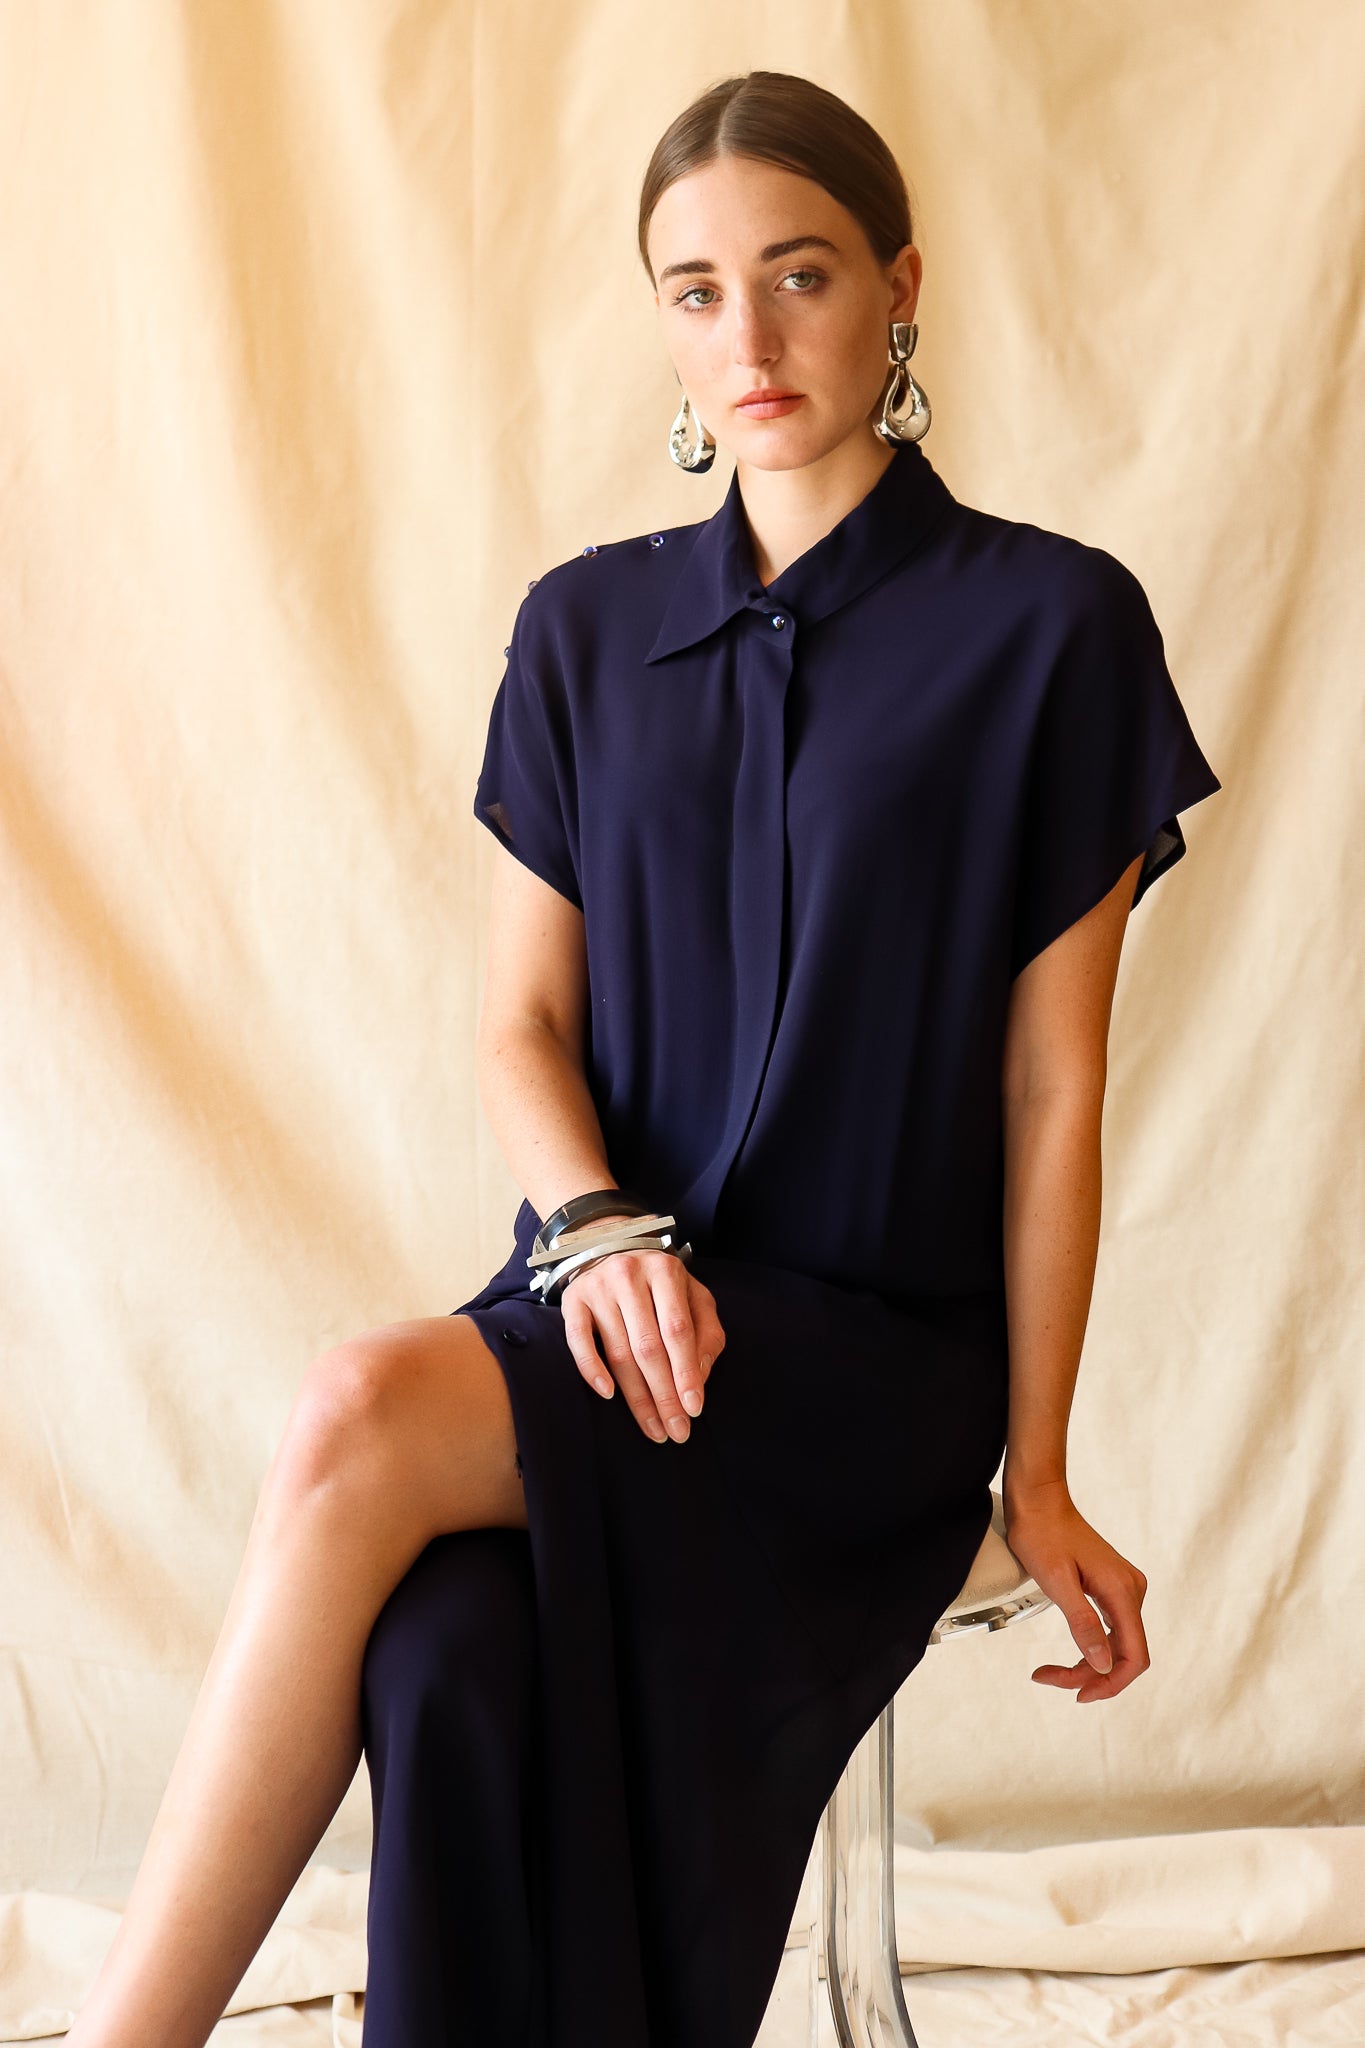 Recess Vintage Consignment LA Girl sitting in sheer navy Karl Lagerfeld Dress